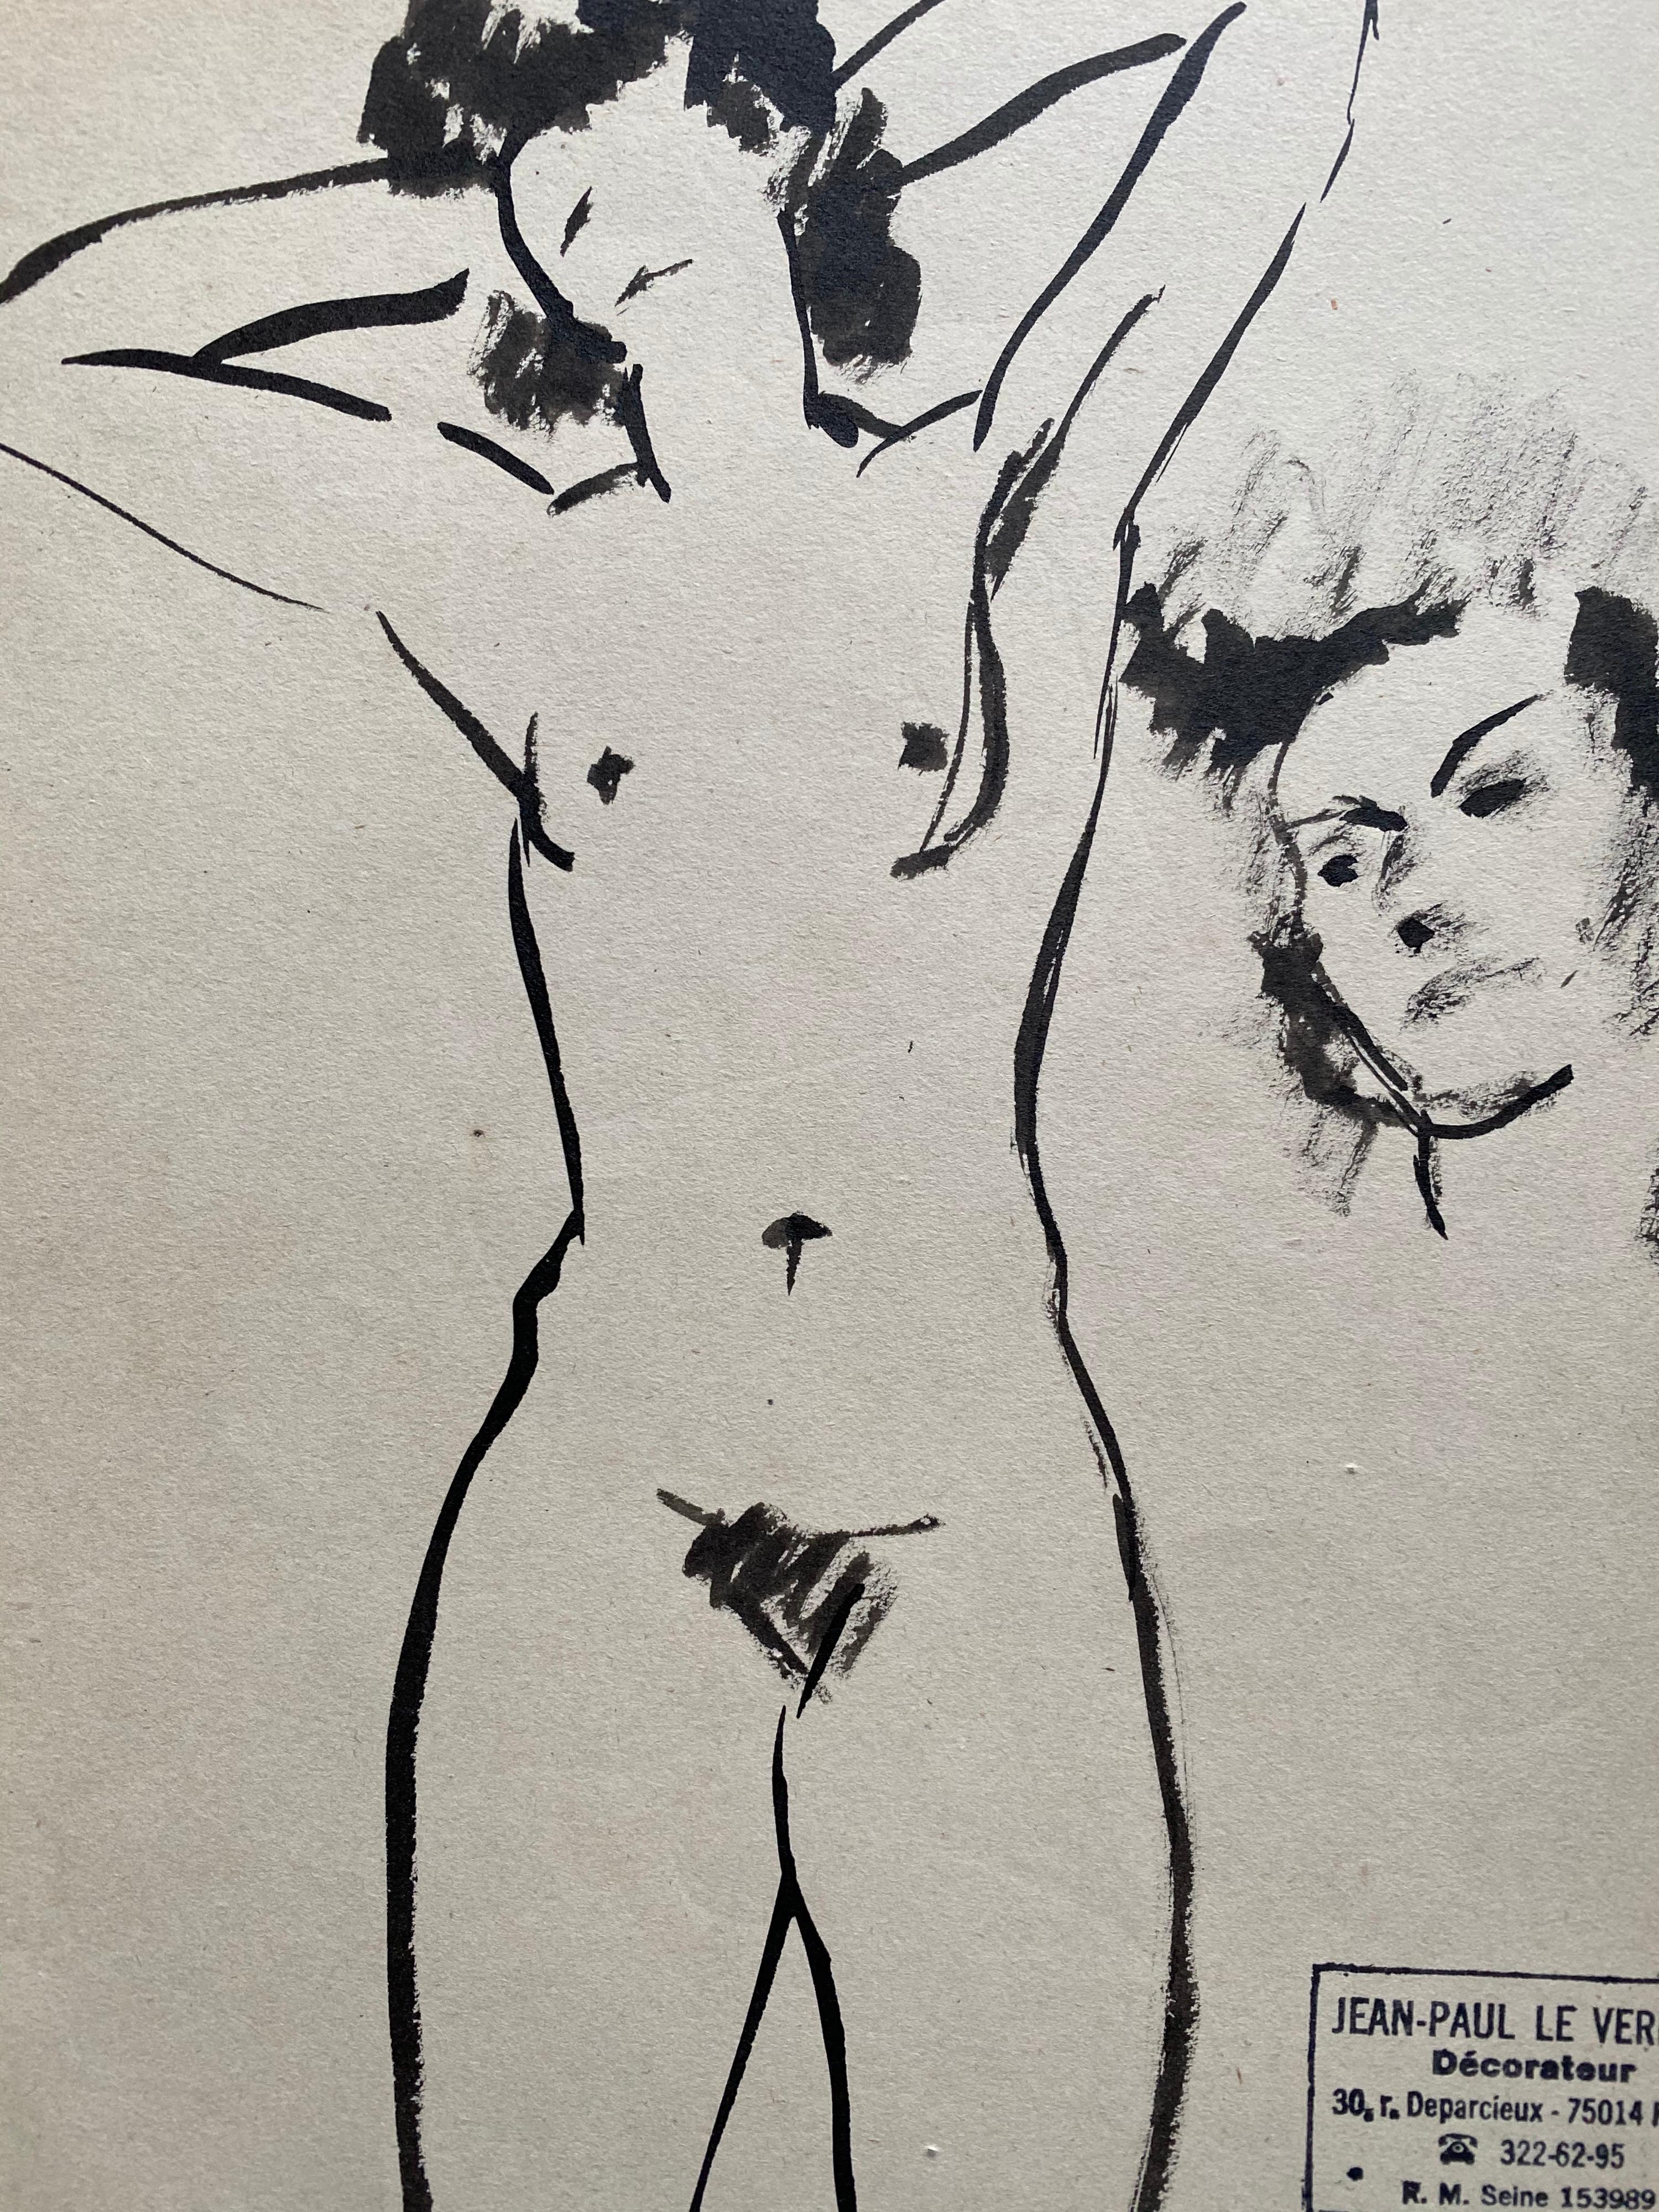 Mid 20th century French Original Line Drawing sketch Nude Female - Stamped - Art by Jean-Paul le Verrier